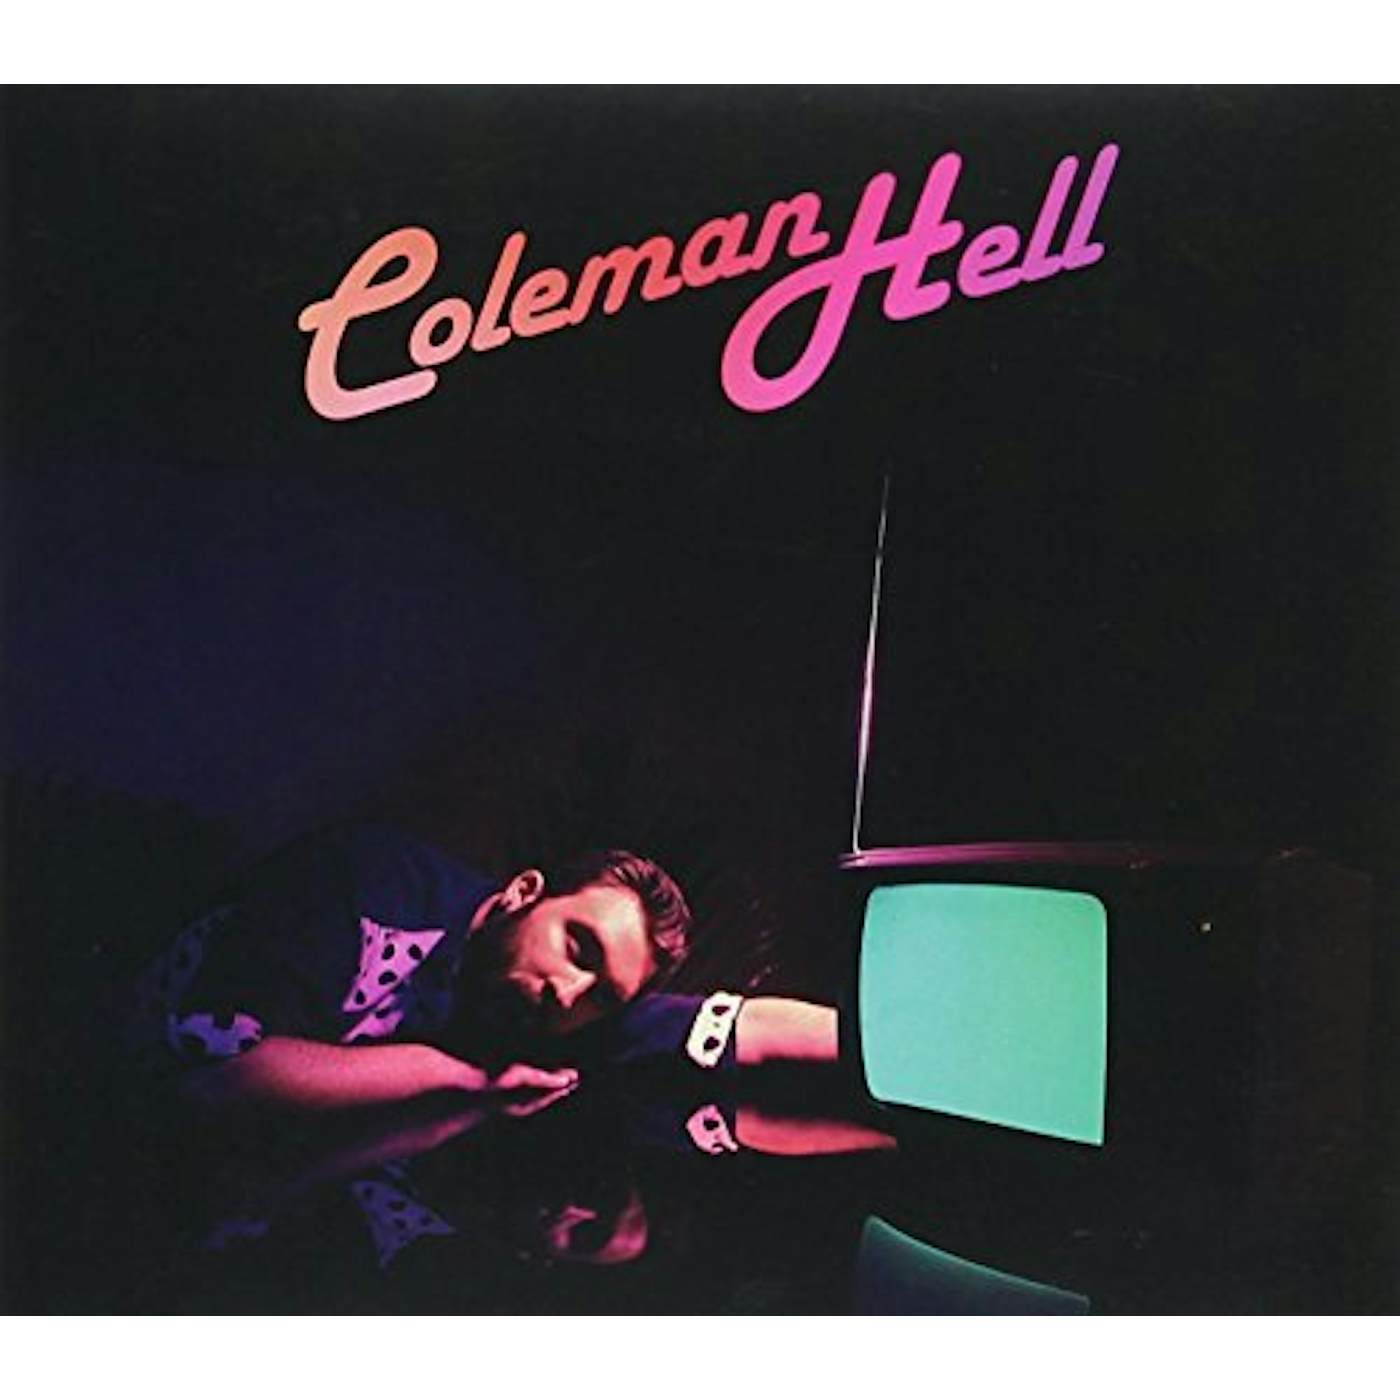 COLEMAN HELL CD